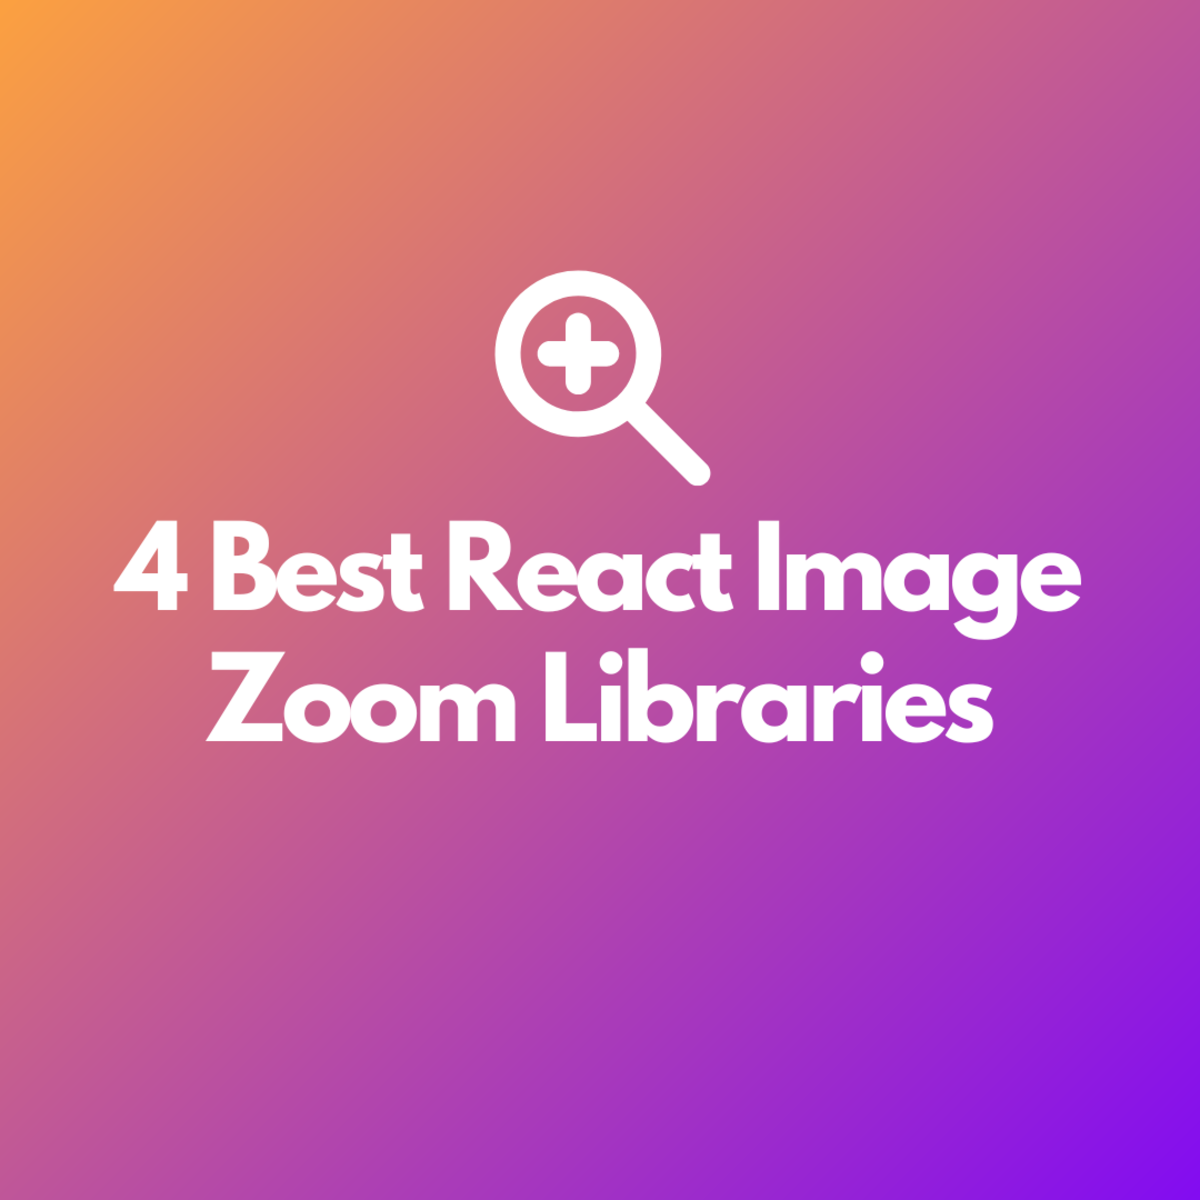 4 Best React Image Zoom Libraries to Check Out: The Ultimate List